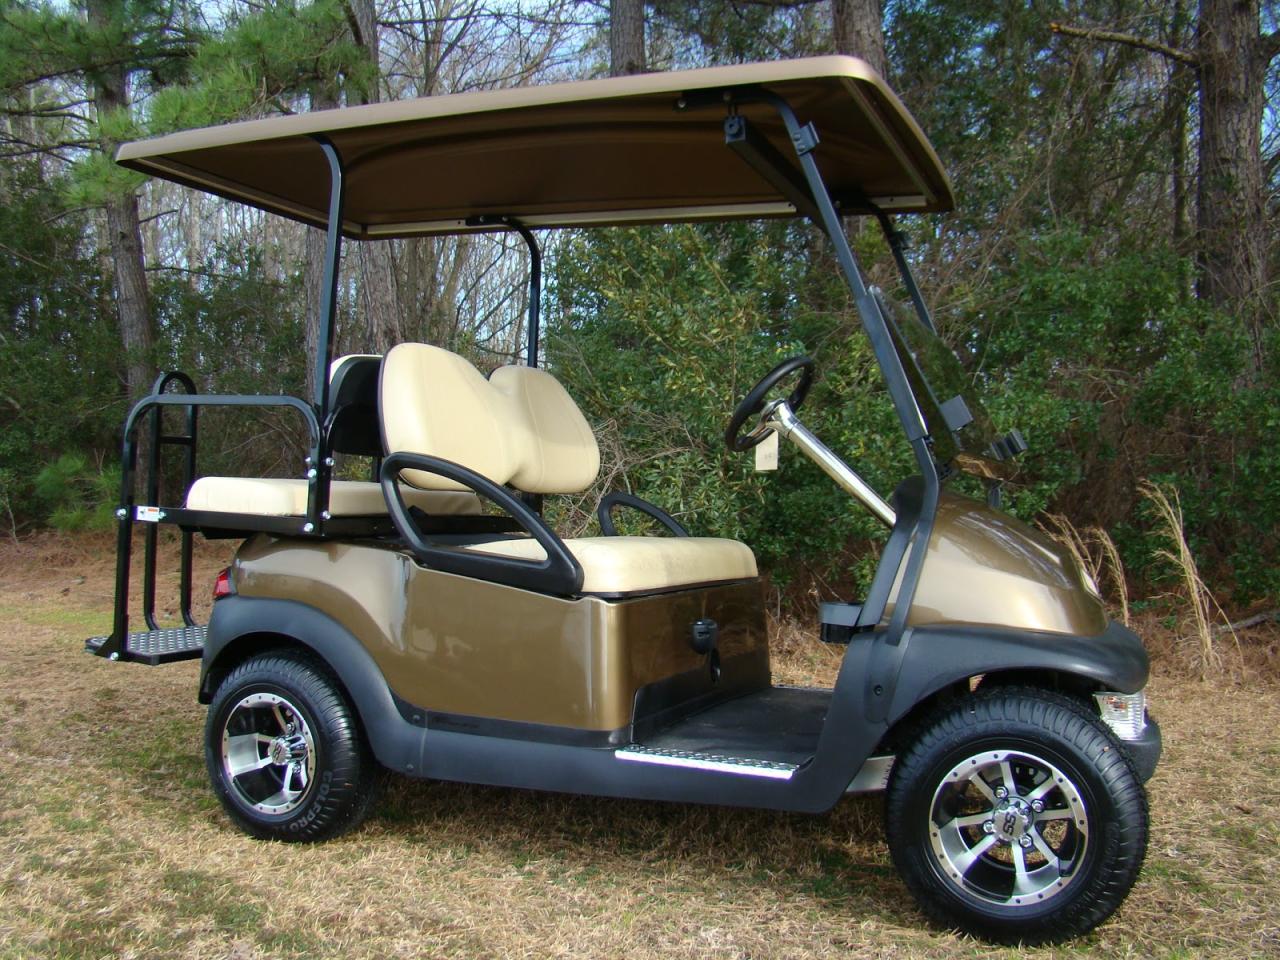 Used Golf Carts for Sale by Owner in Crawford, Wisconsin: Your Ride to Adventure